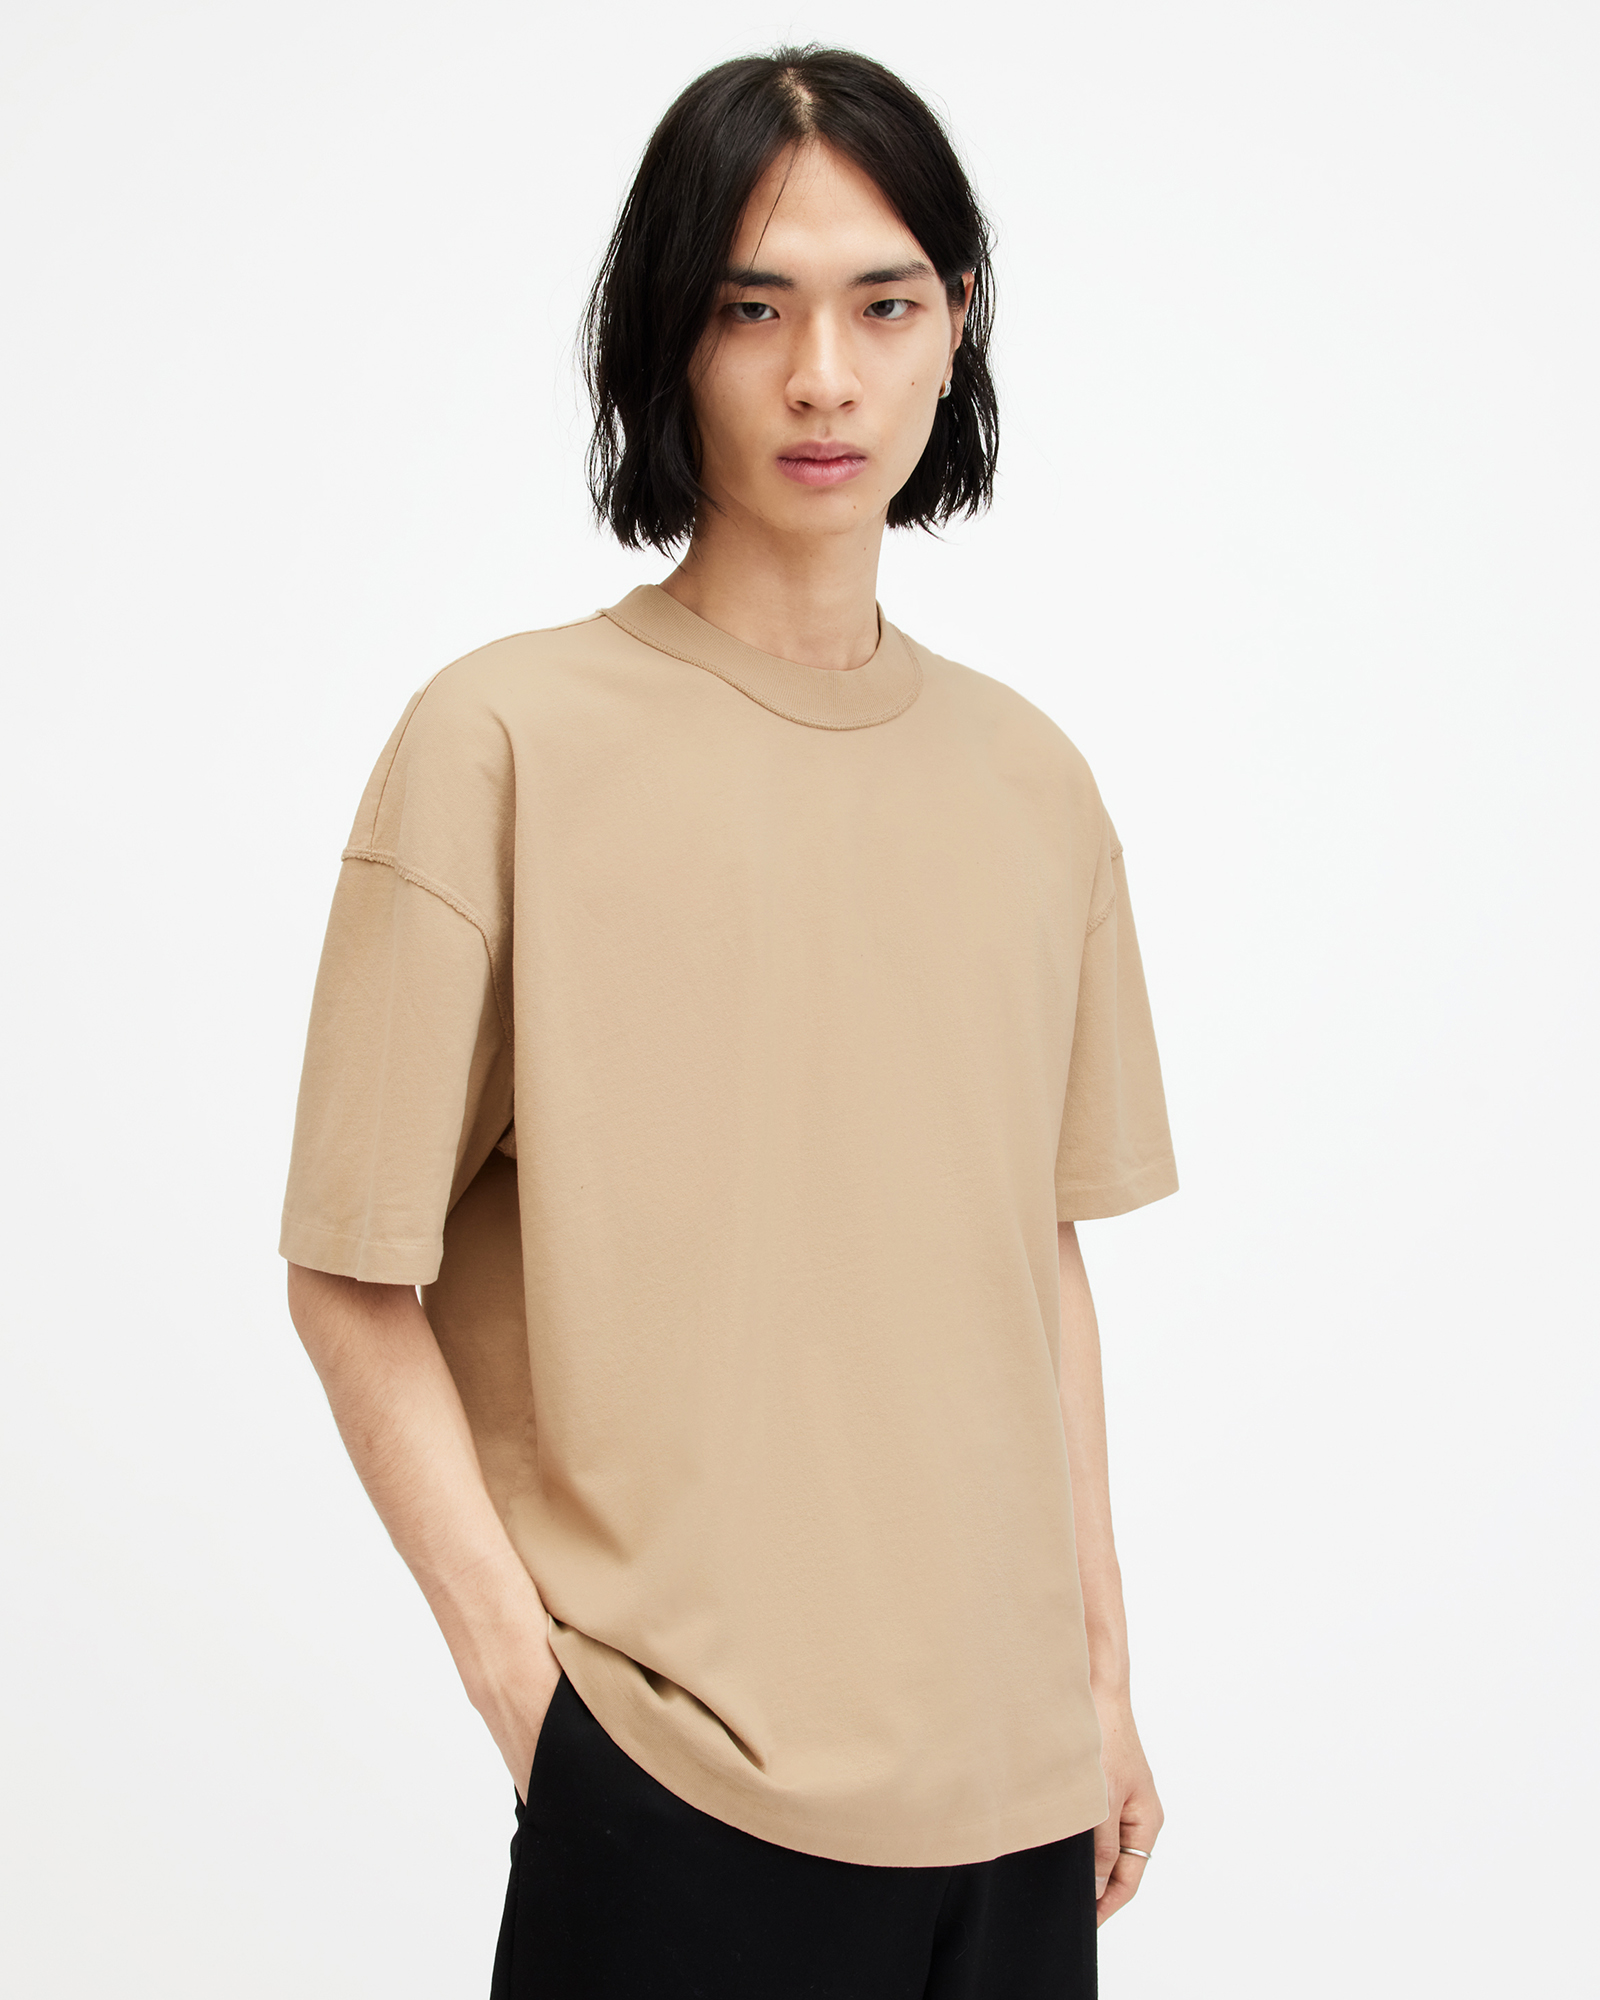 AllSaints Isac Oversized Crew Neck T-Shirt,, TOFFEE TAUPE